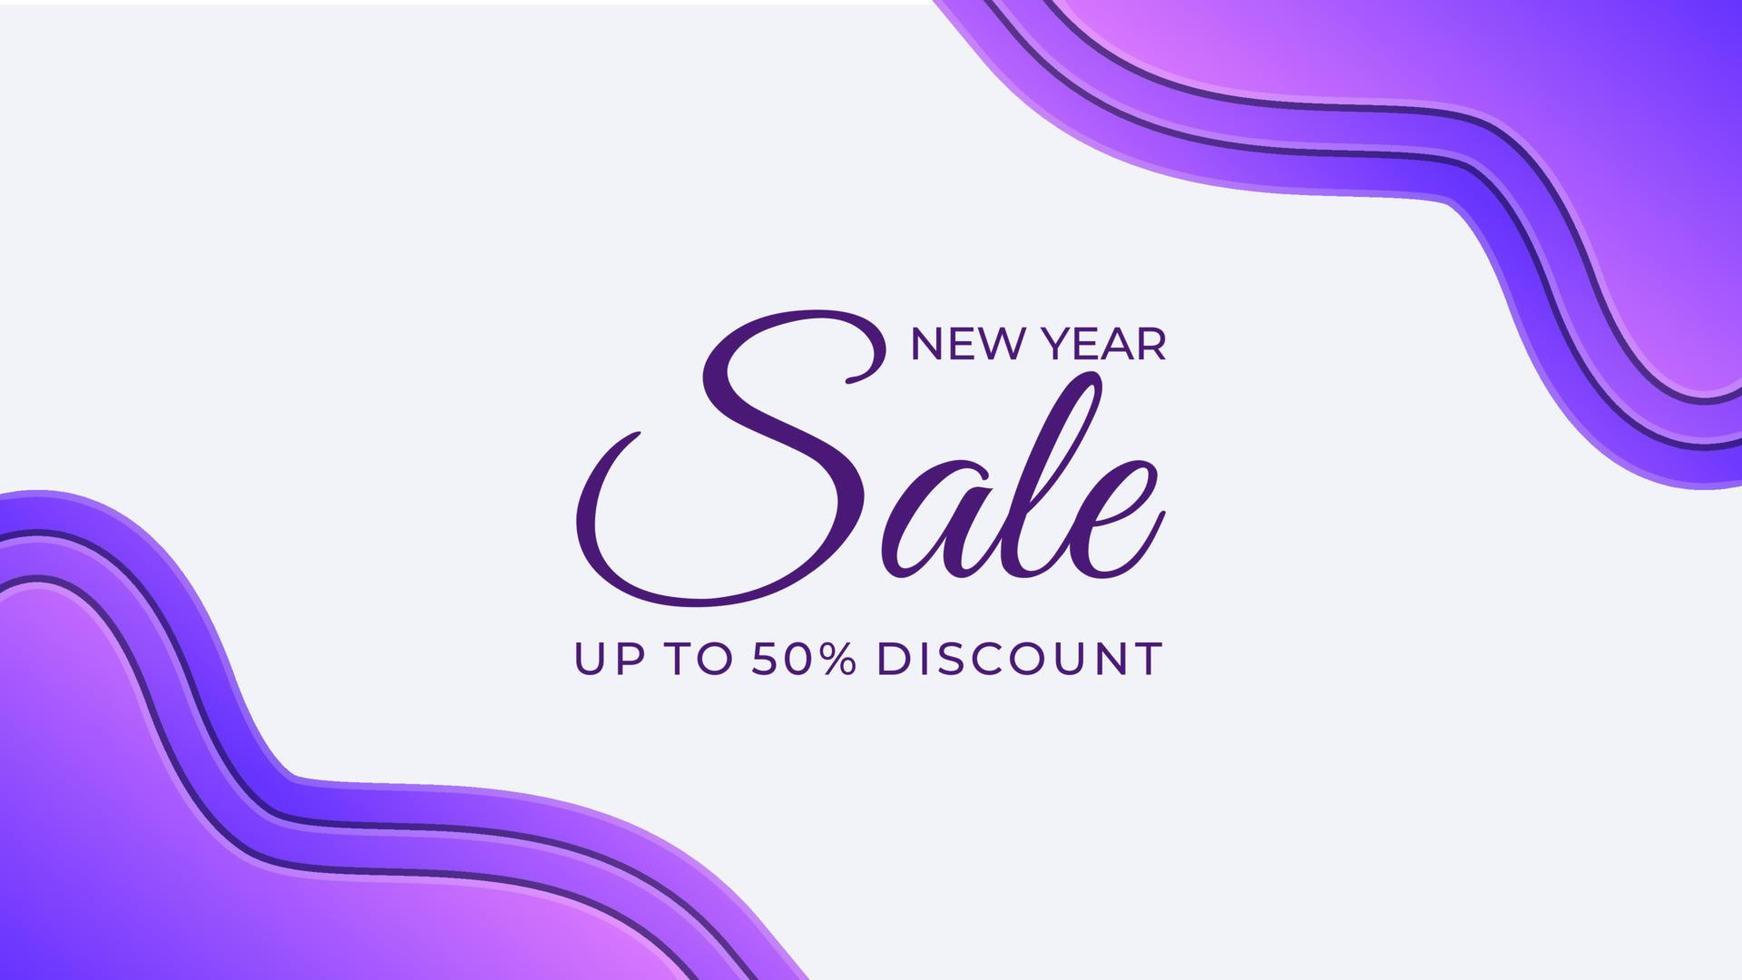 New Year sale background banner template design with purple color Free Vector